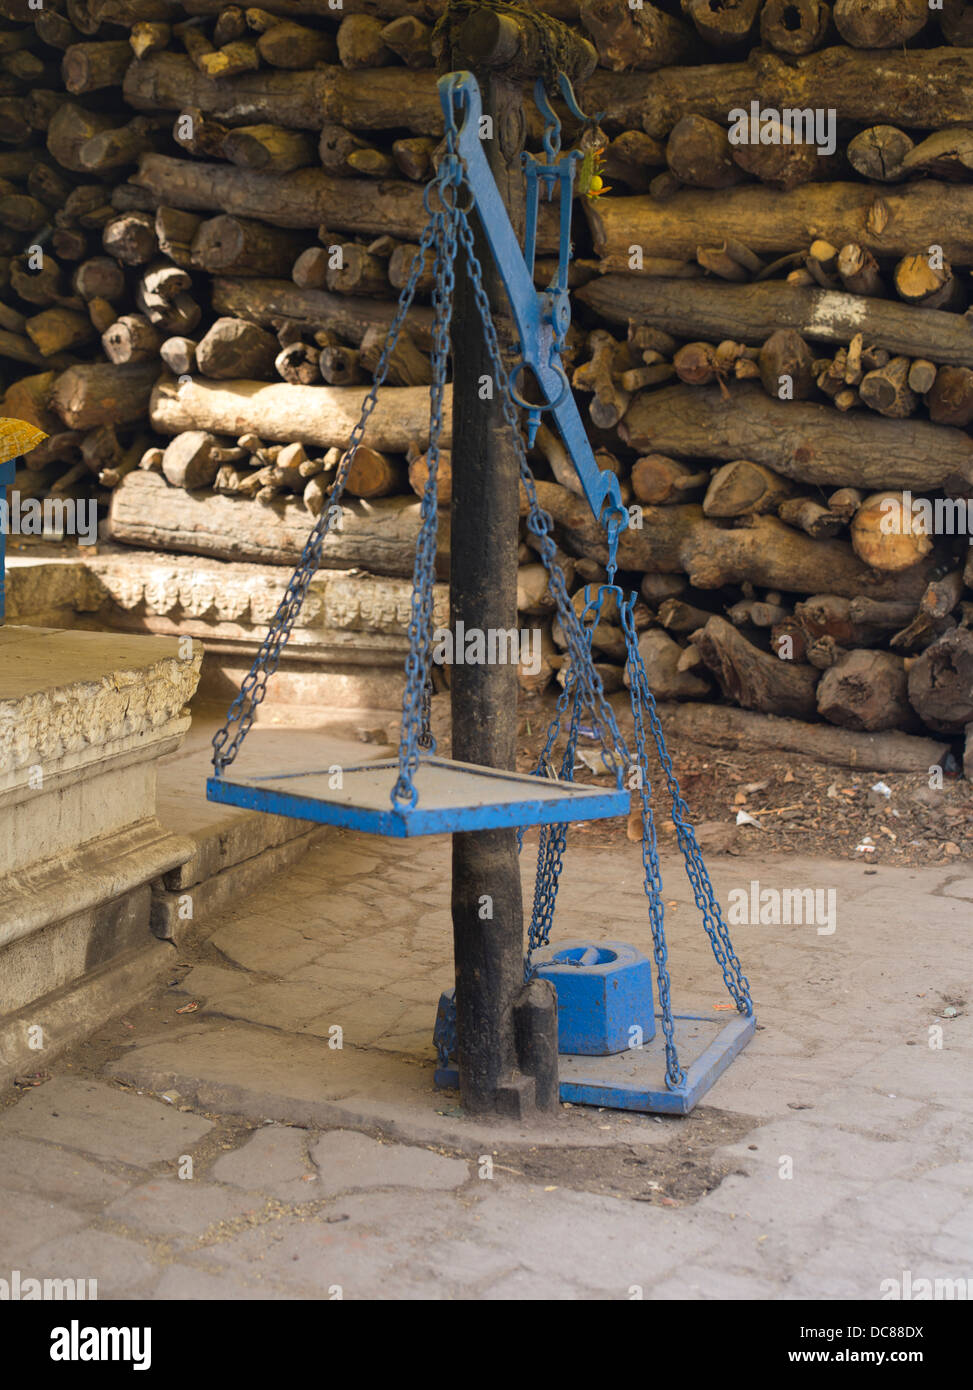 Manikarnika Ghat. Wood for cremations and scales on the banks of the Ganges River - Varanasi, India Stock Photo